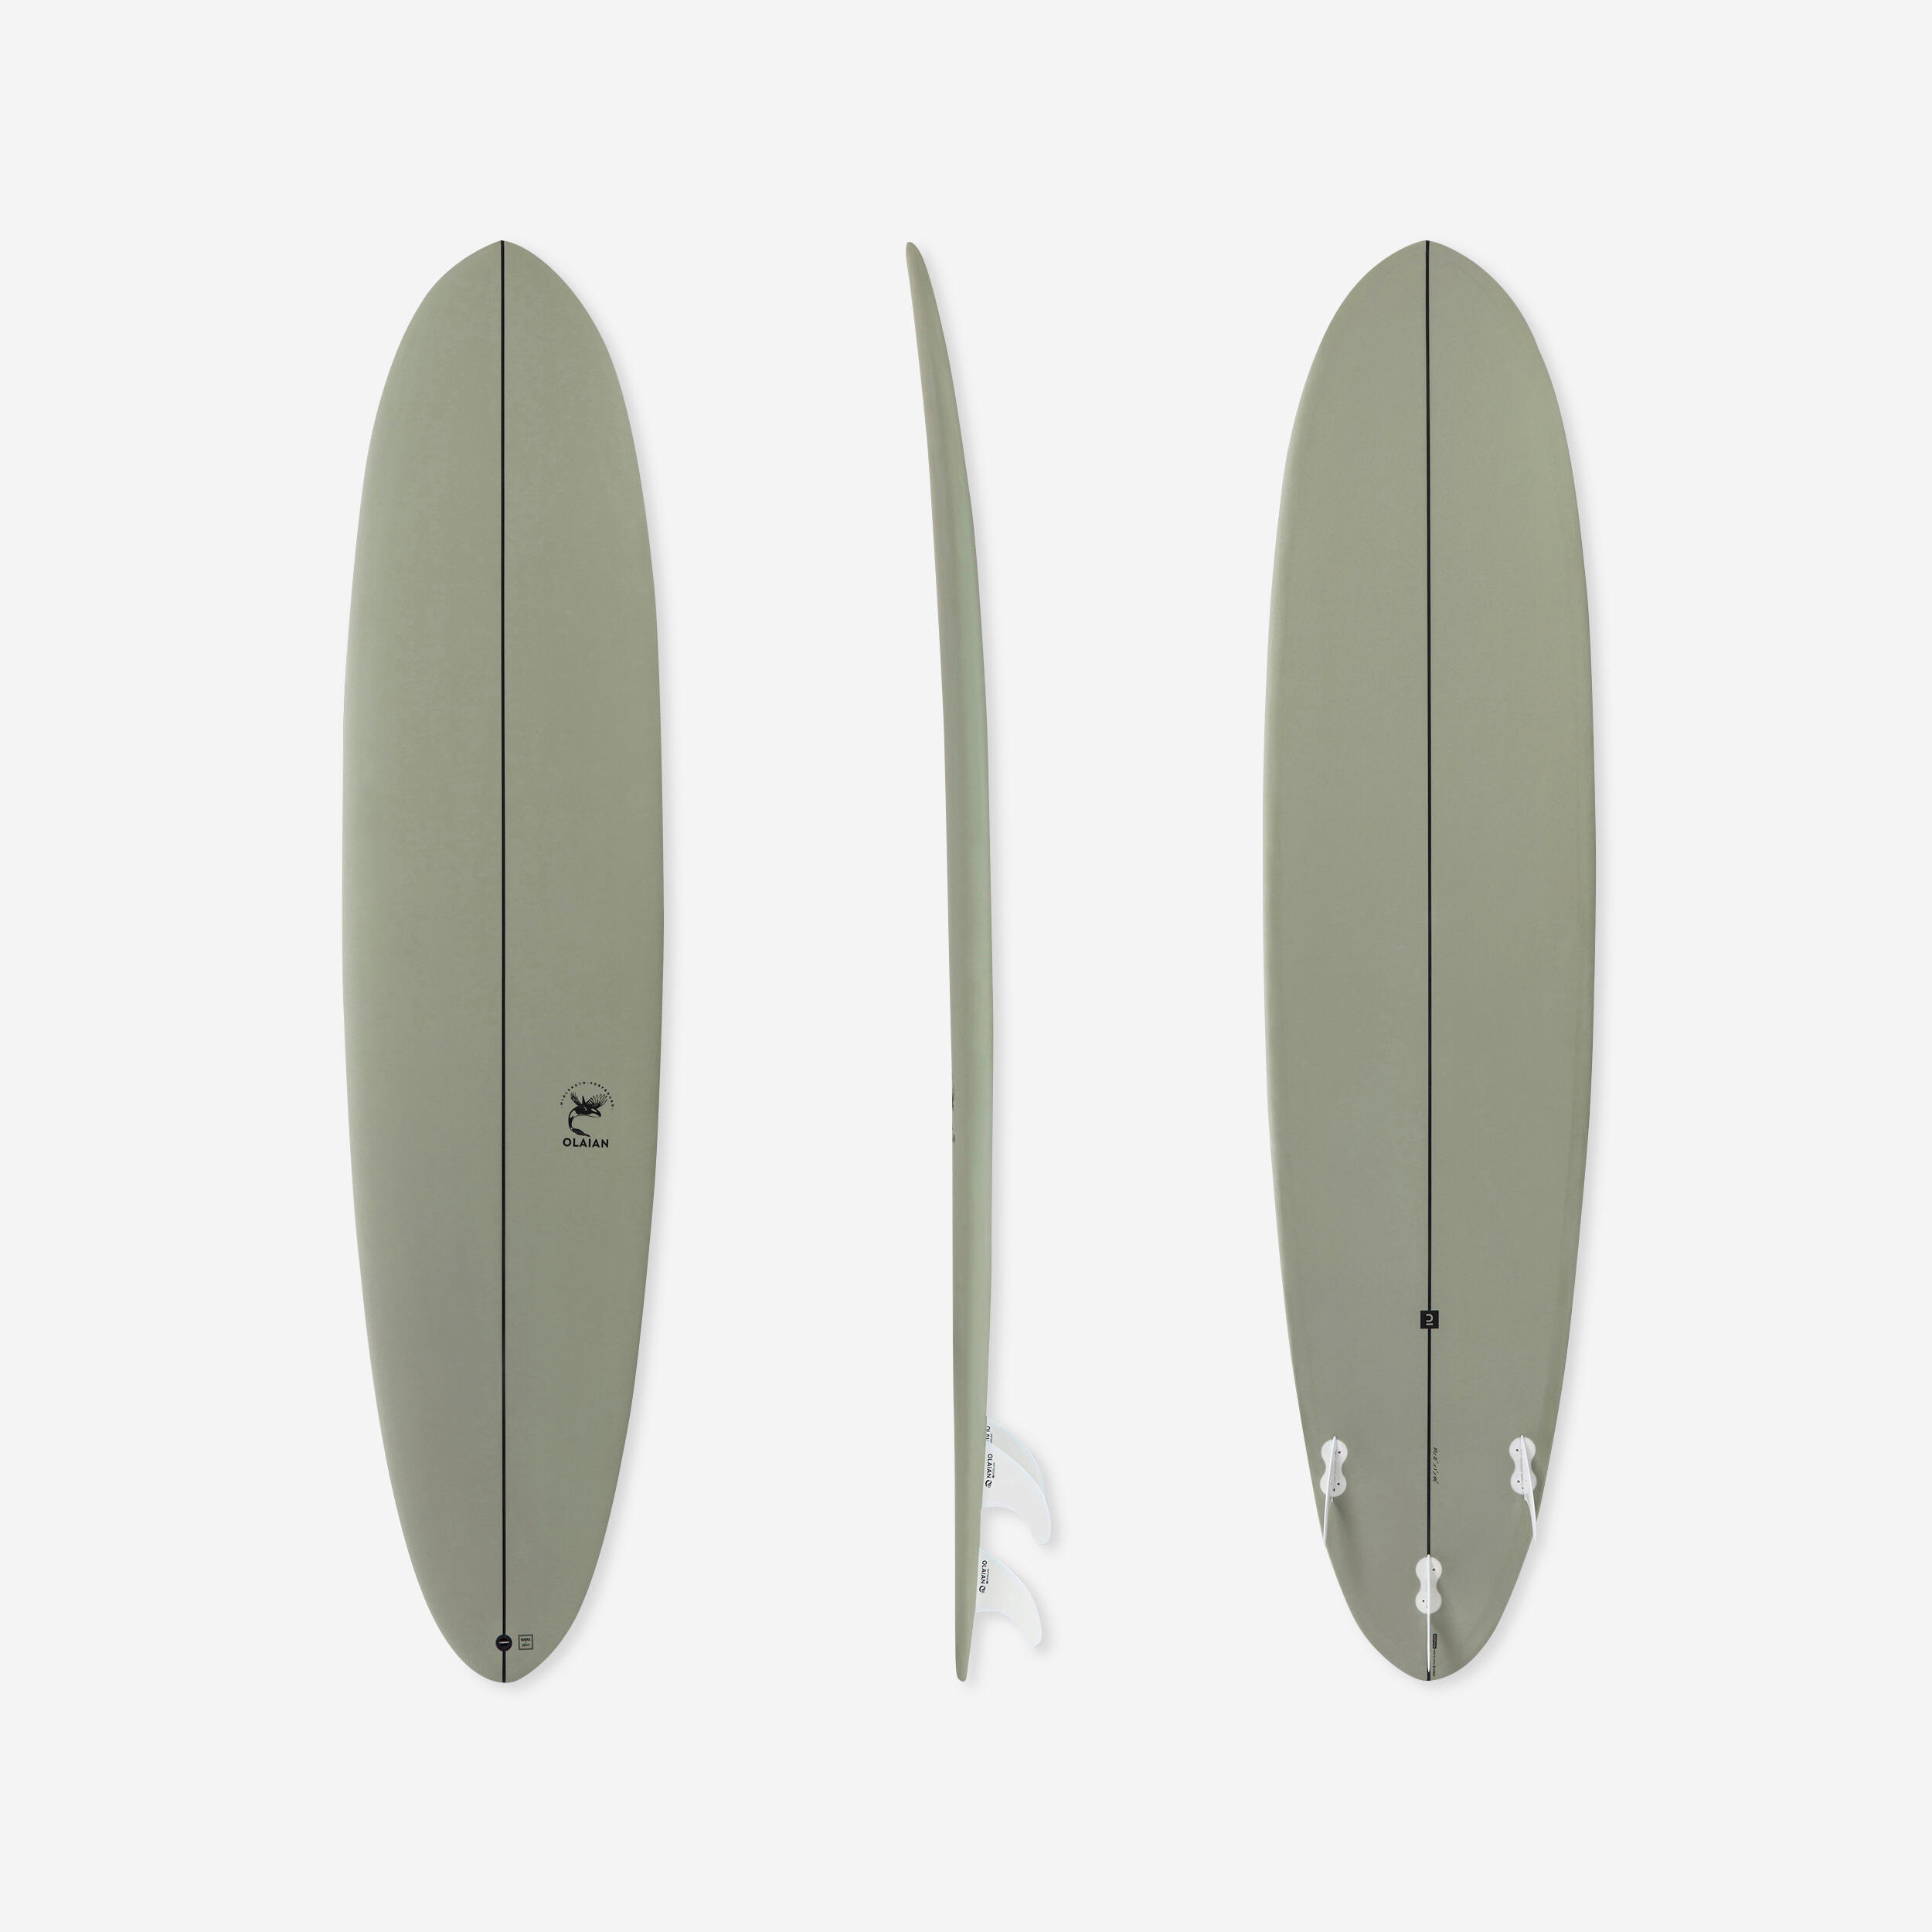 SURFBOARD 500 Hybrid 8' with 3 Fins. 1/16